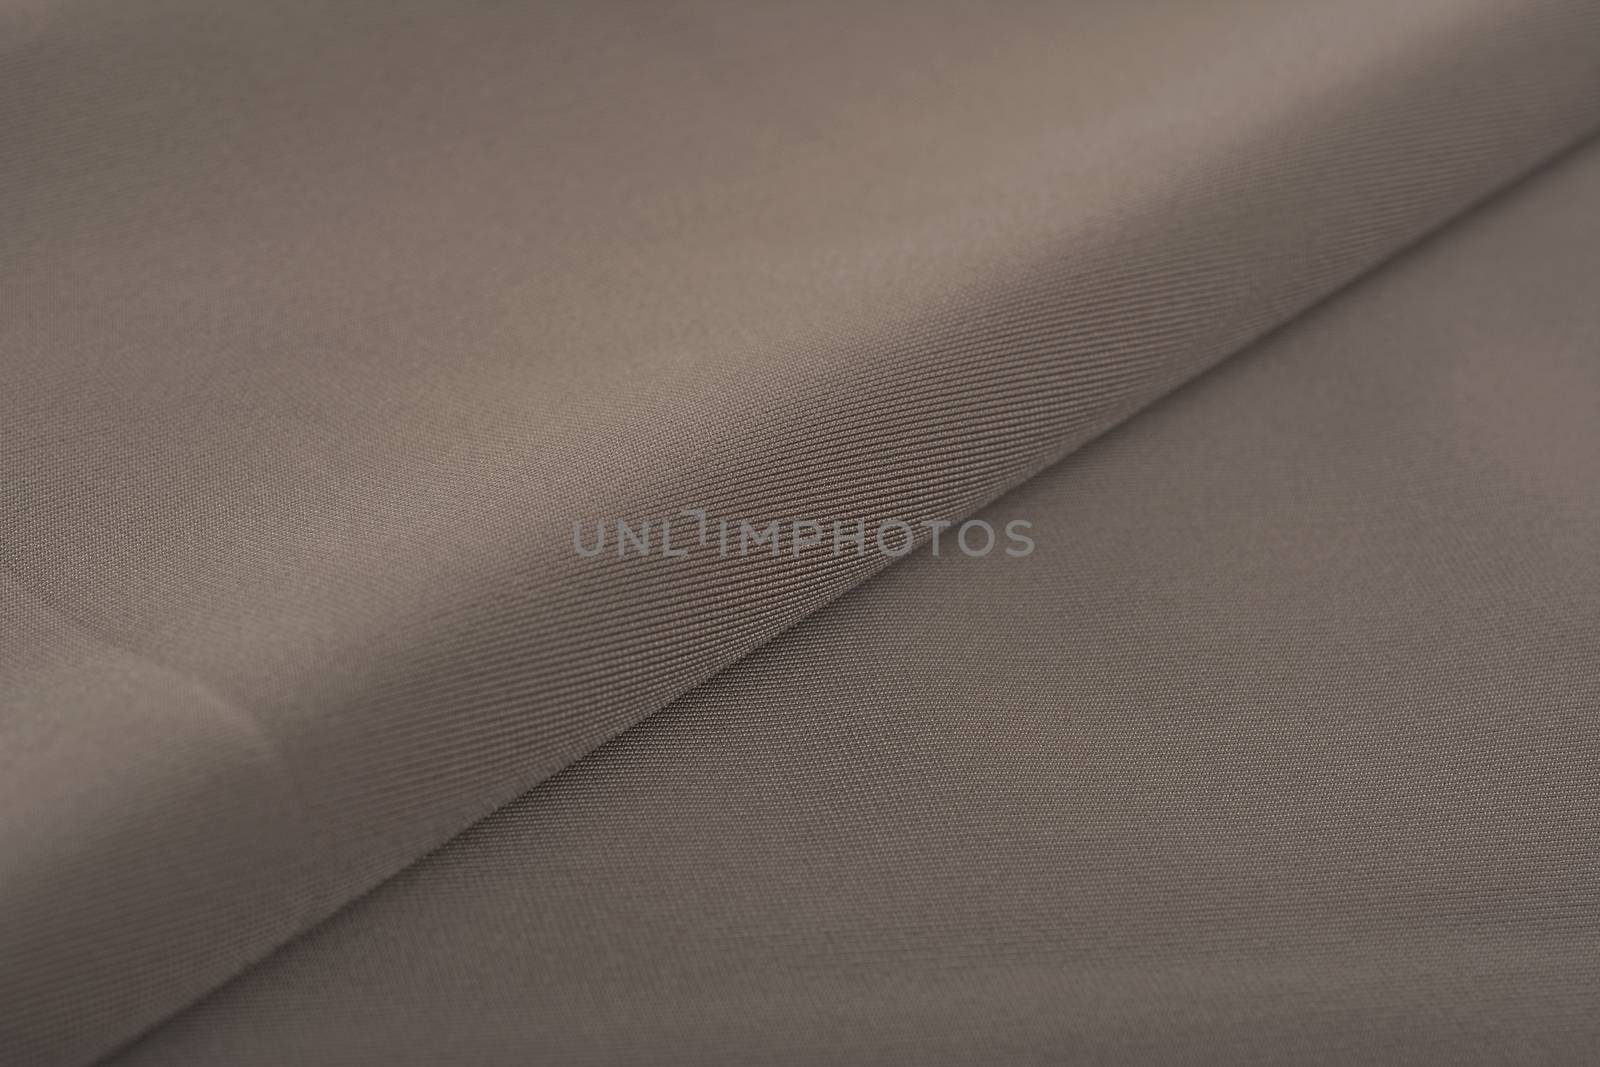 khaki Knitted elastic fabric, weaving of threads texture, crumpled fold. For underwear, sports clothes and swimwear. Space for text.